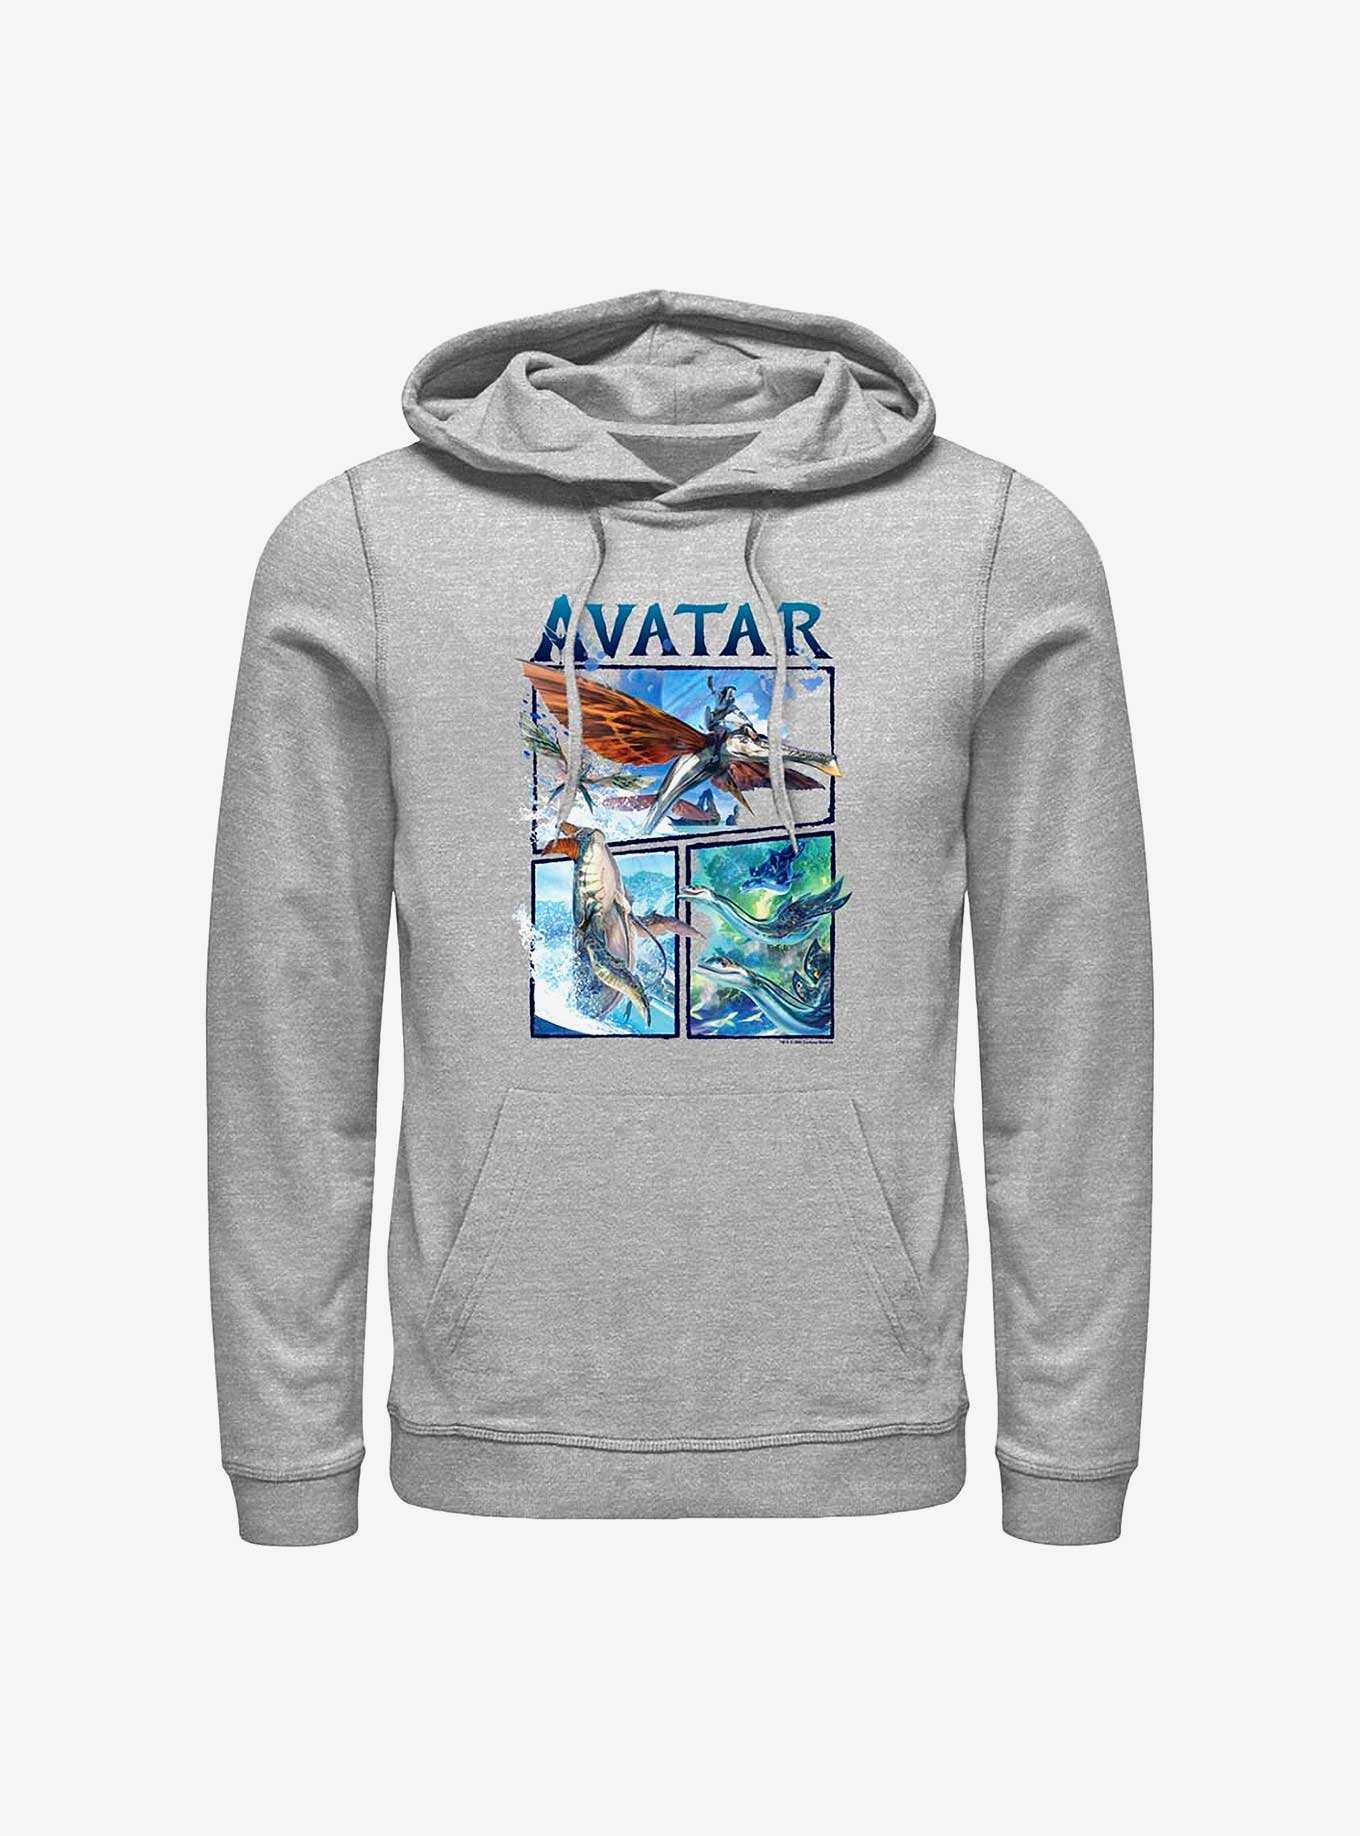 Avatar: The Way of Water Air and Sea Hoodie, , hi-res